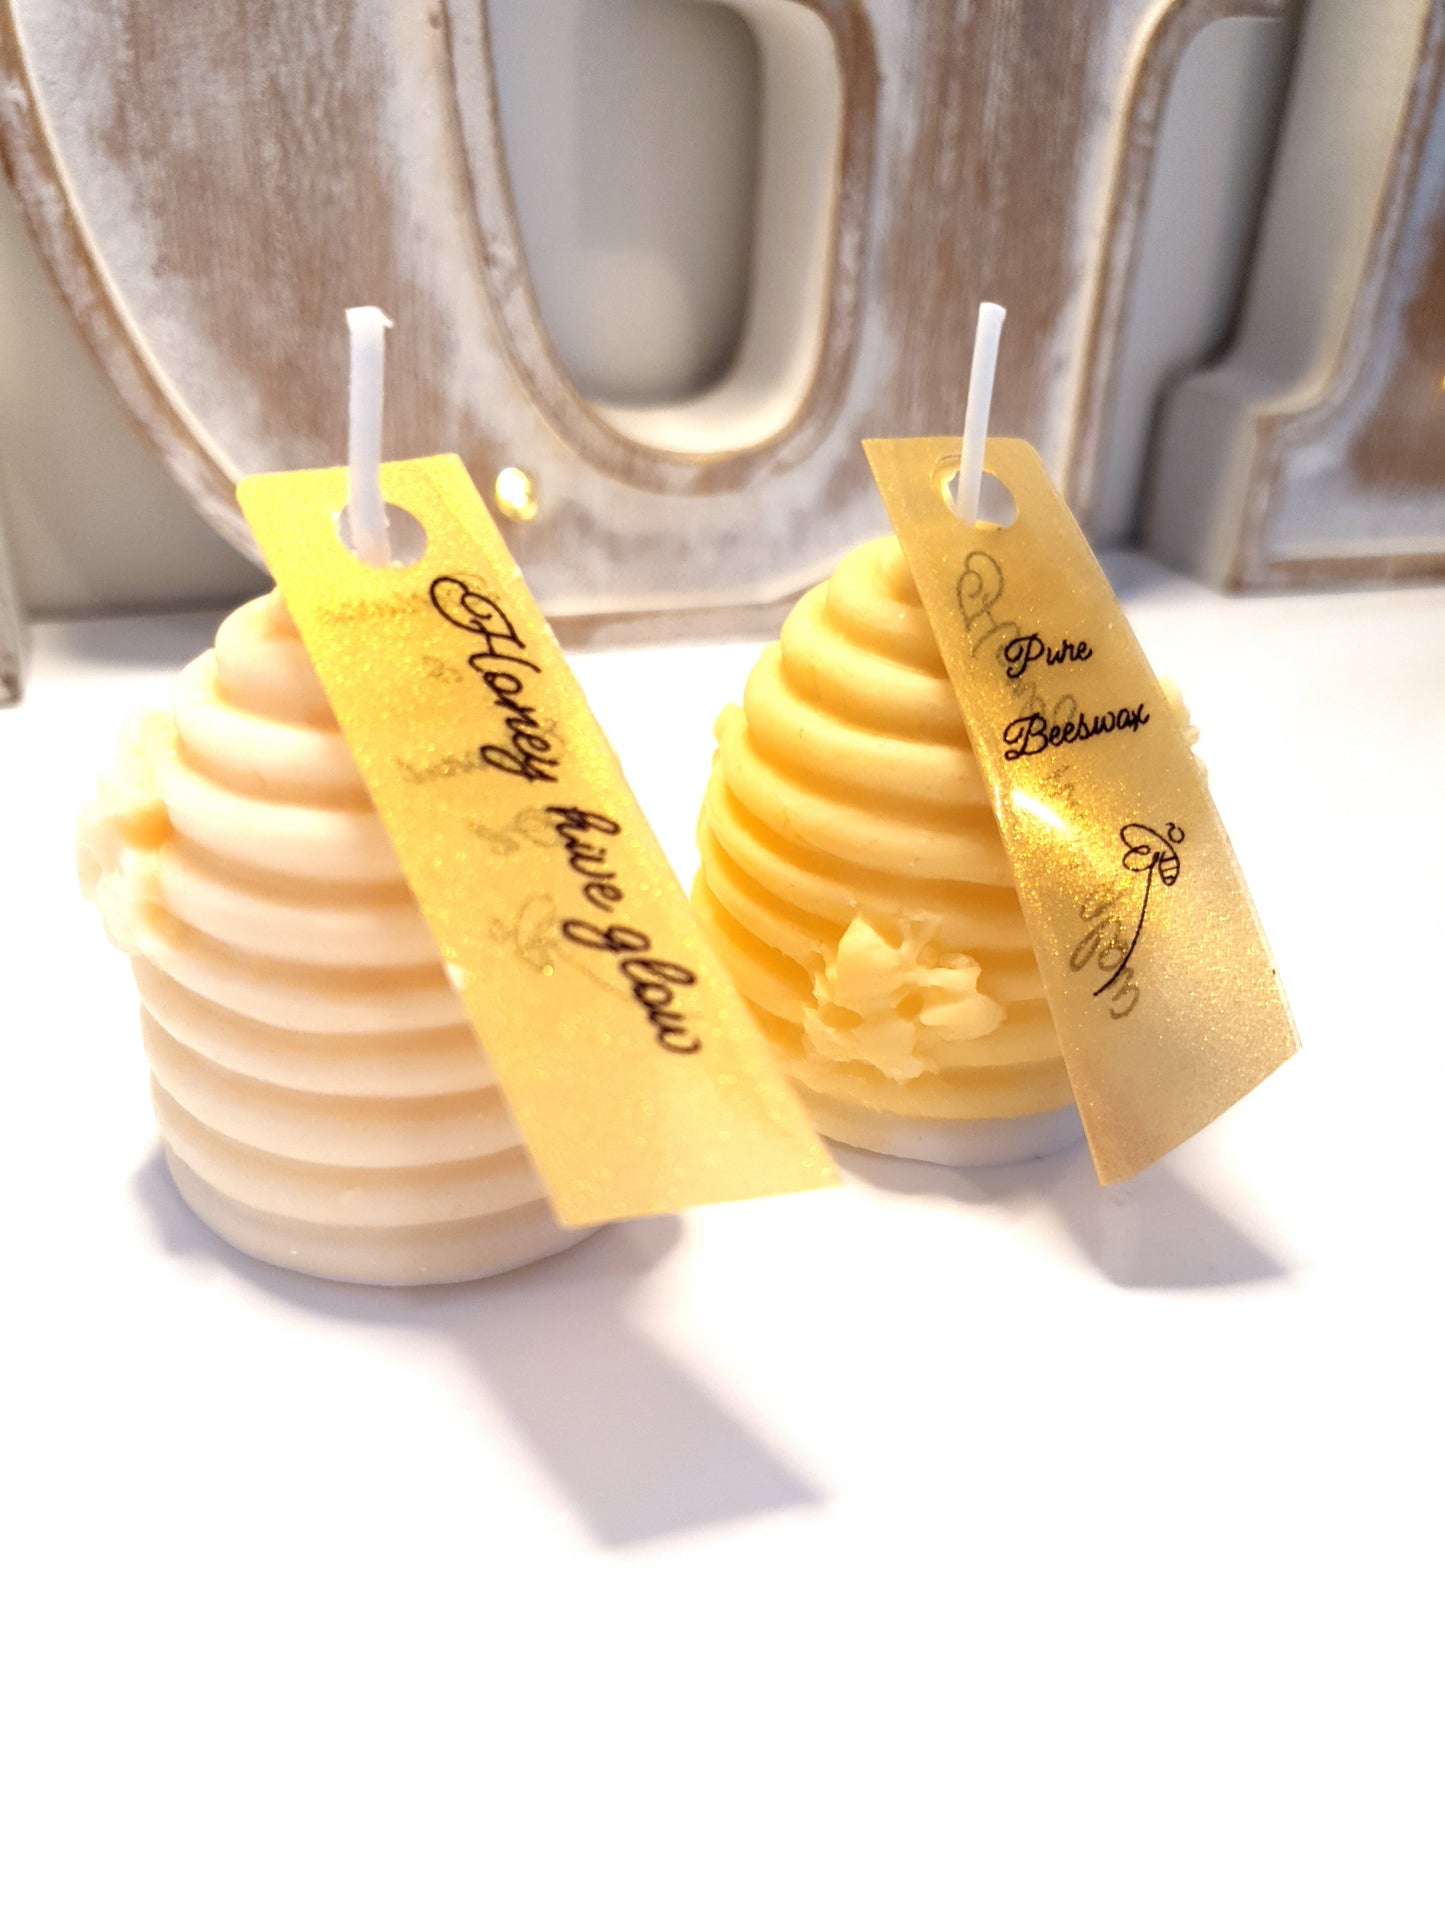 'Honey Hive Glow' Cute Beehive Candle Duo Gift Set.  100% Pure Beeswax.